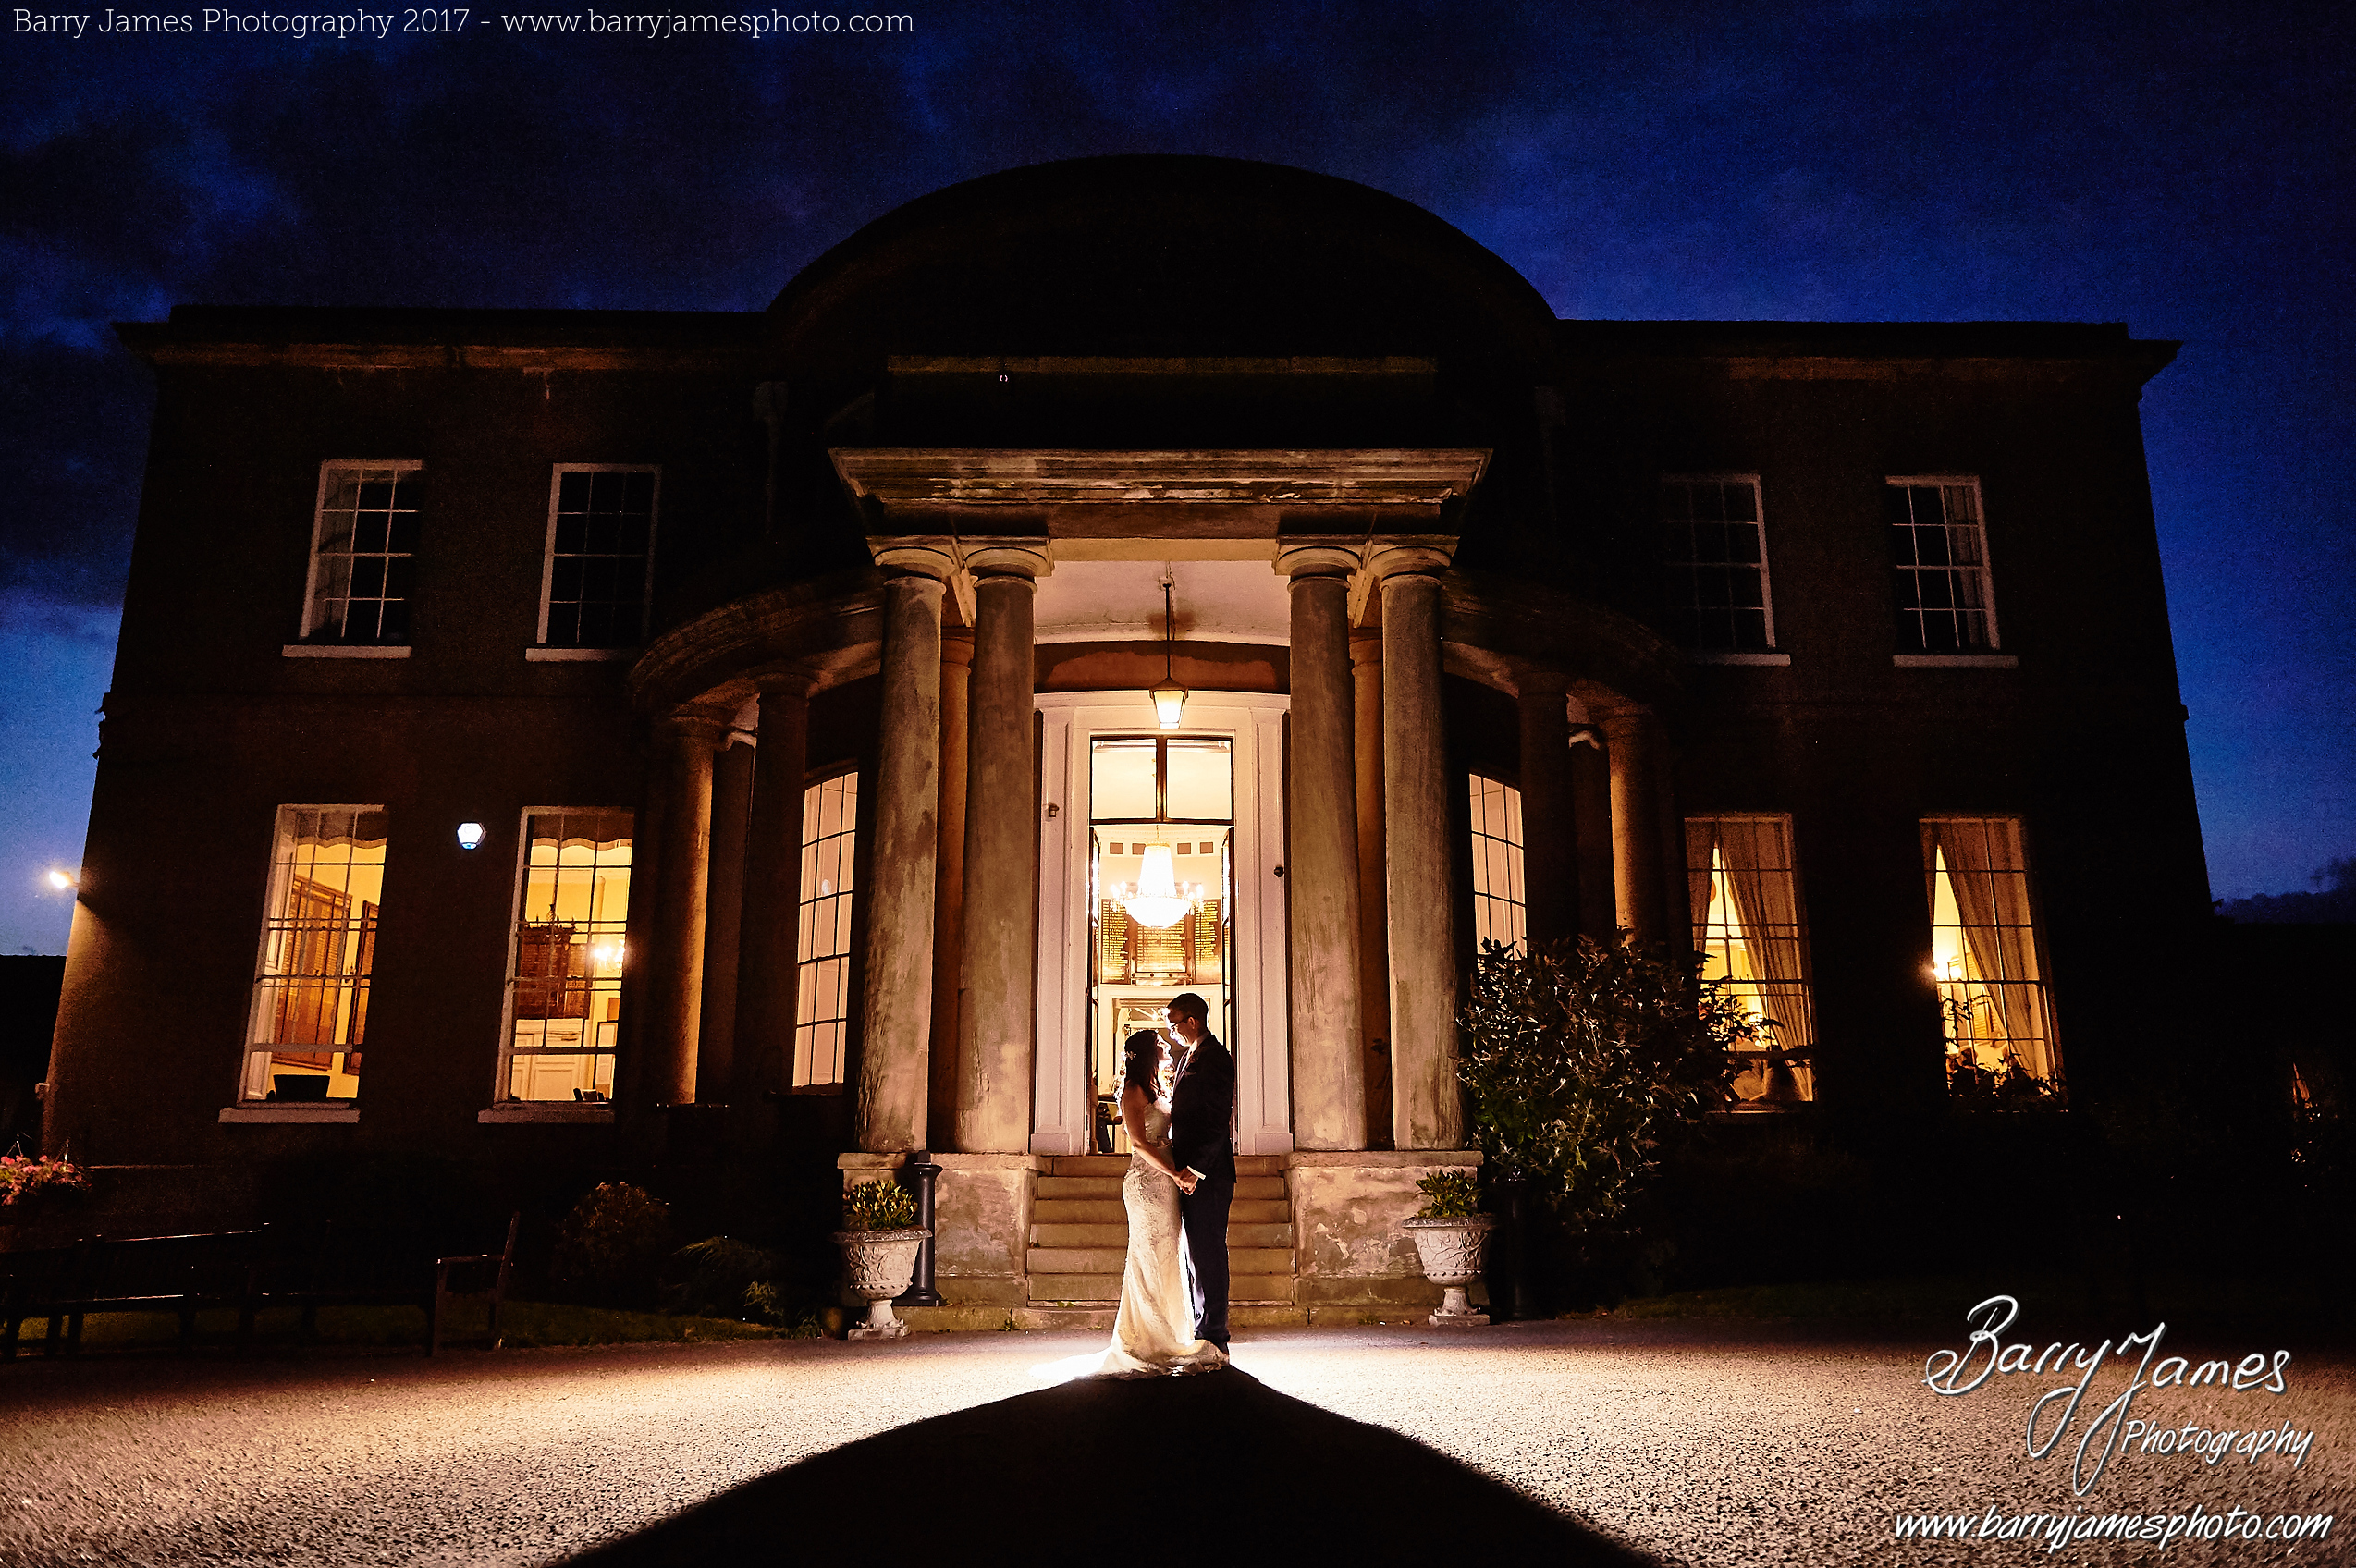 Here is a taster selection of images from their wedding at Brocton Hall Golf Club, Stafford..to register to see the full gallery when they are ready please use this link.. http://www.barryjamesphoto.com/client-area-registration/ Wedding Photographs by www.barryjamesphoto.com Please do not crop. Feel free to tag yourself.